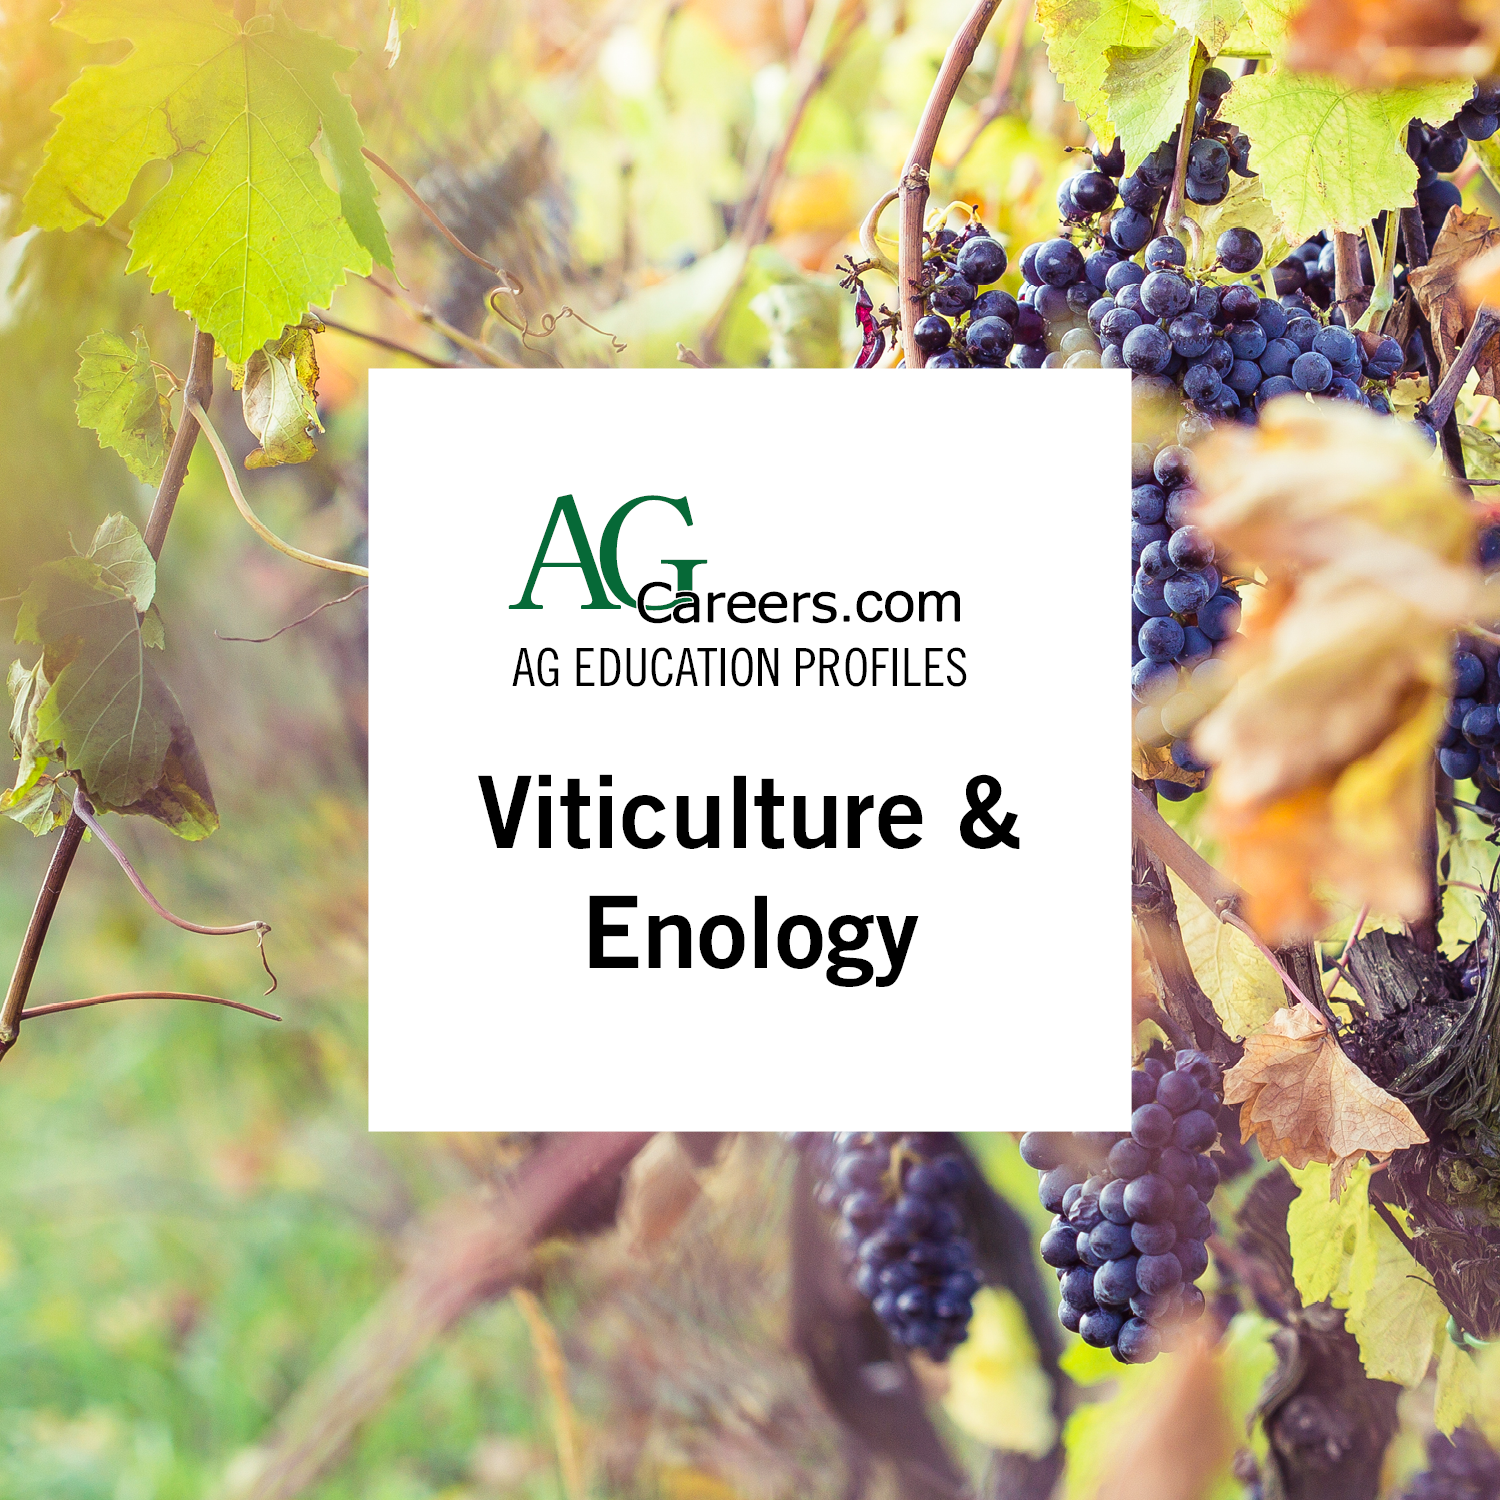 viticulture & enology